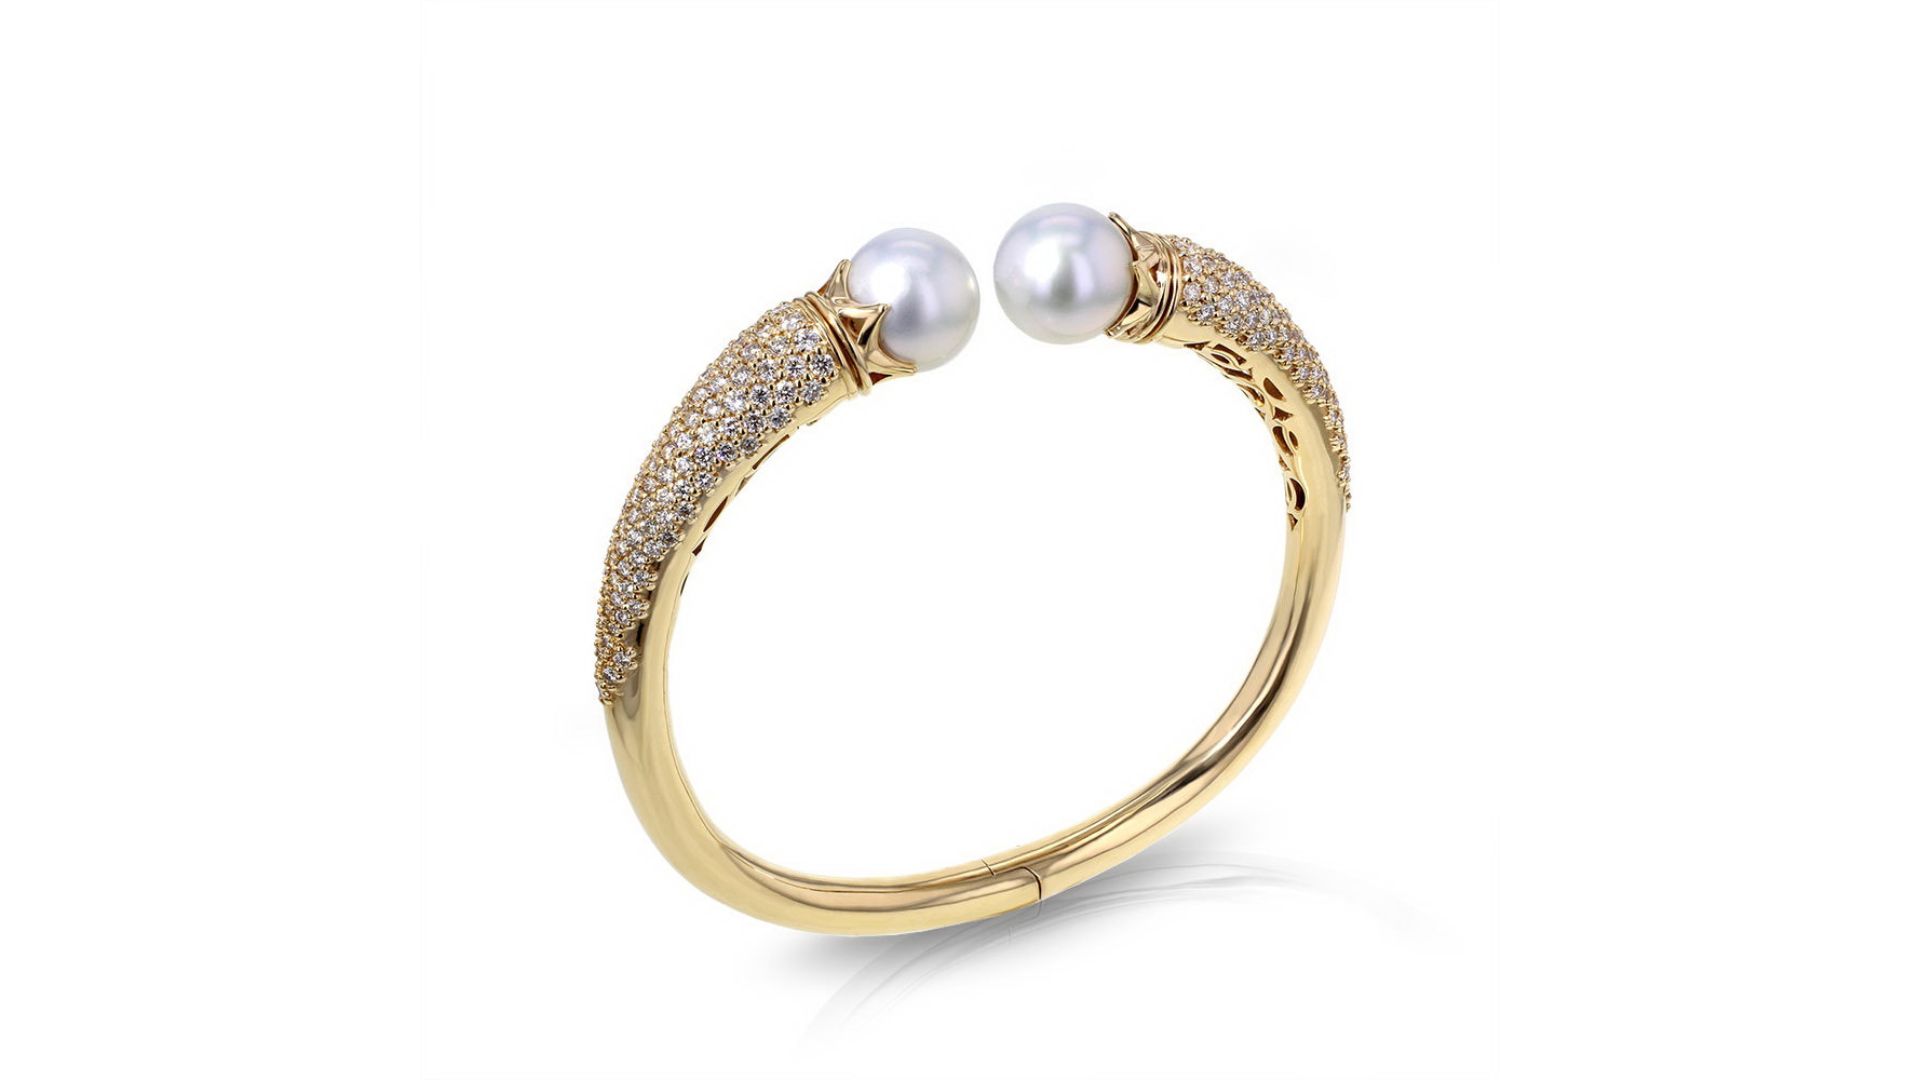 Pearl On The Each End Of Bangle Bracelet